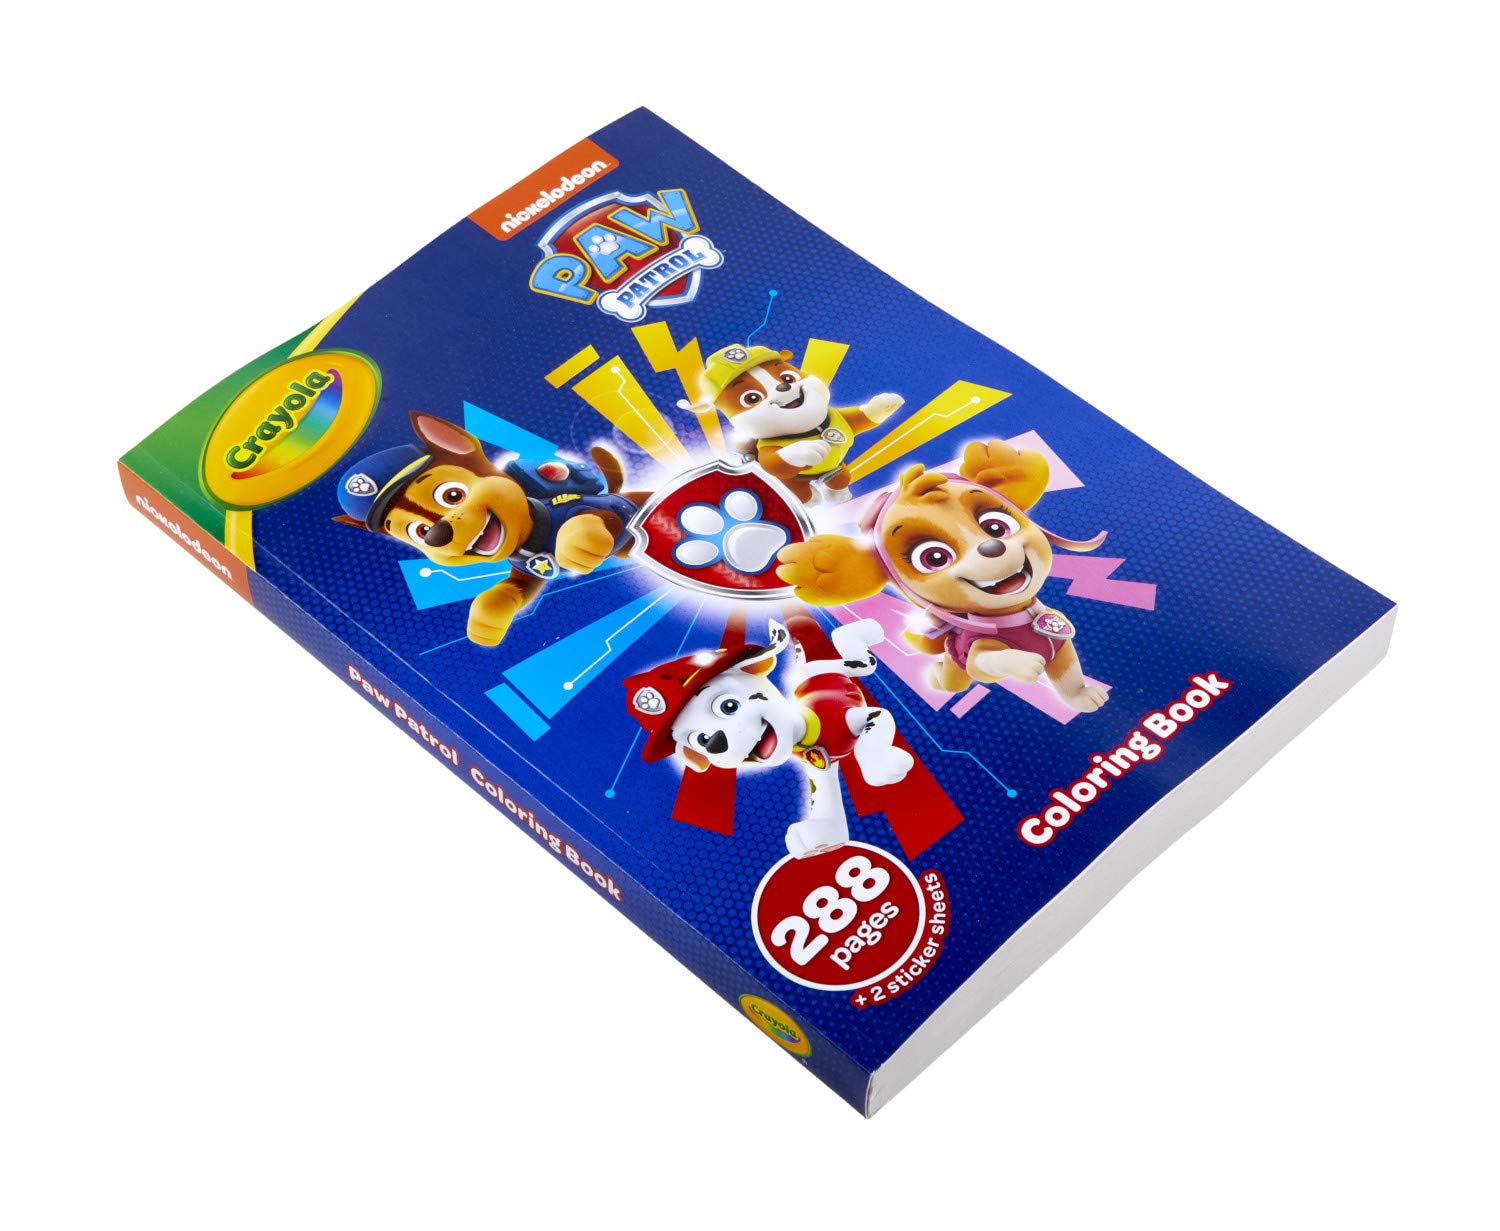 Crayola Paw Patrol Coloring Book with Stickers, Gift for Kids, 288 Pages, Ages 3, 4, 5, 6